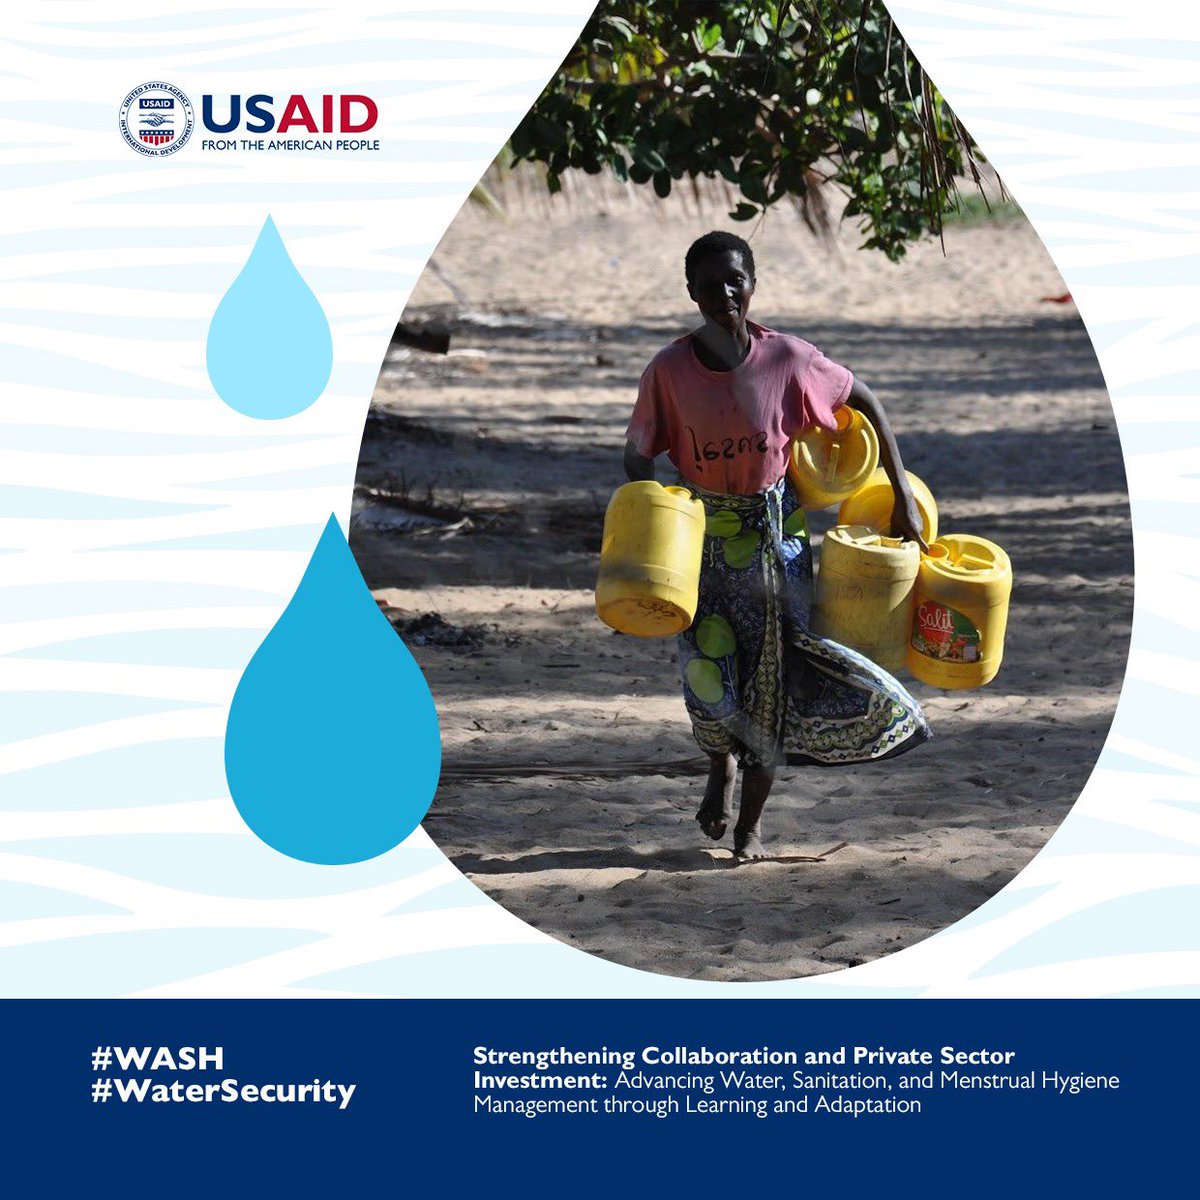 Urban, low-income households mostly depend on small, local providers (SLPs) for provision of water services as opposed to regulated water utilities. #WaterSecurity #WASH @USAIDKenya @USAIDWater @FeedtheFuture @ResilienceLear2 @fl_org @MWAWater